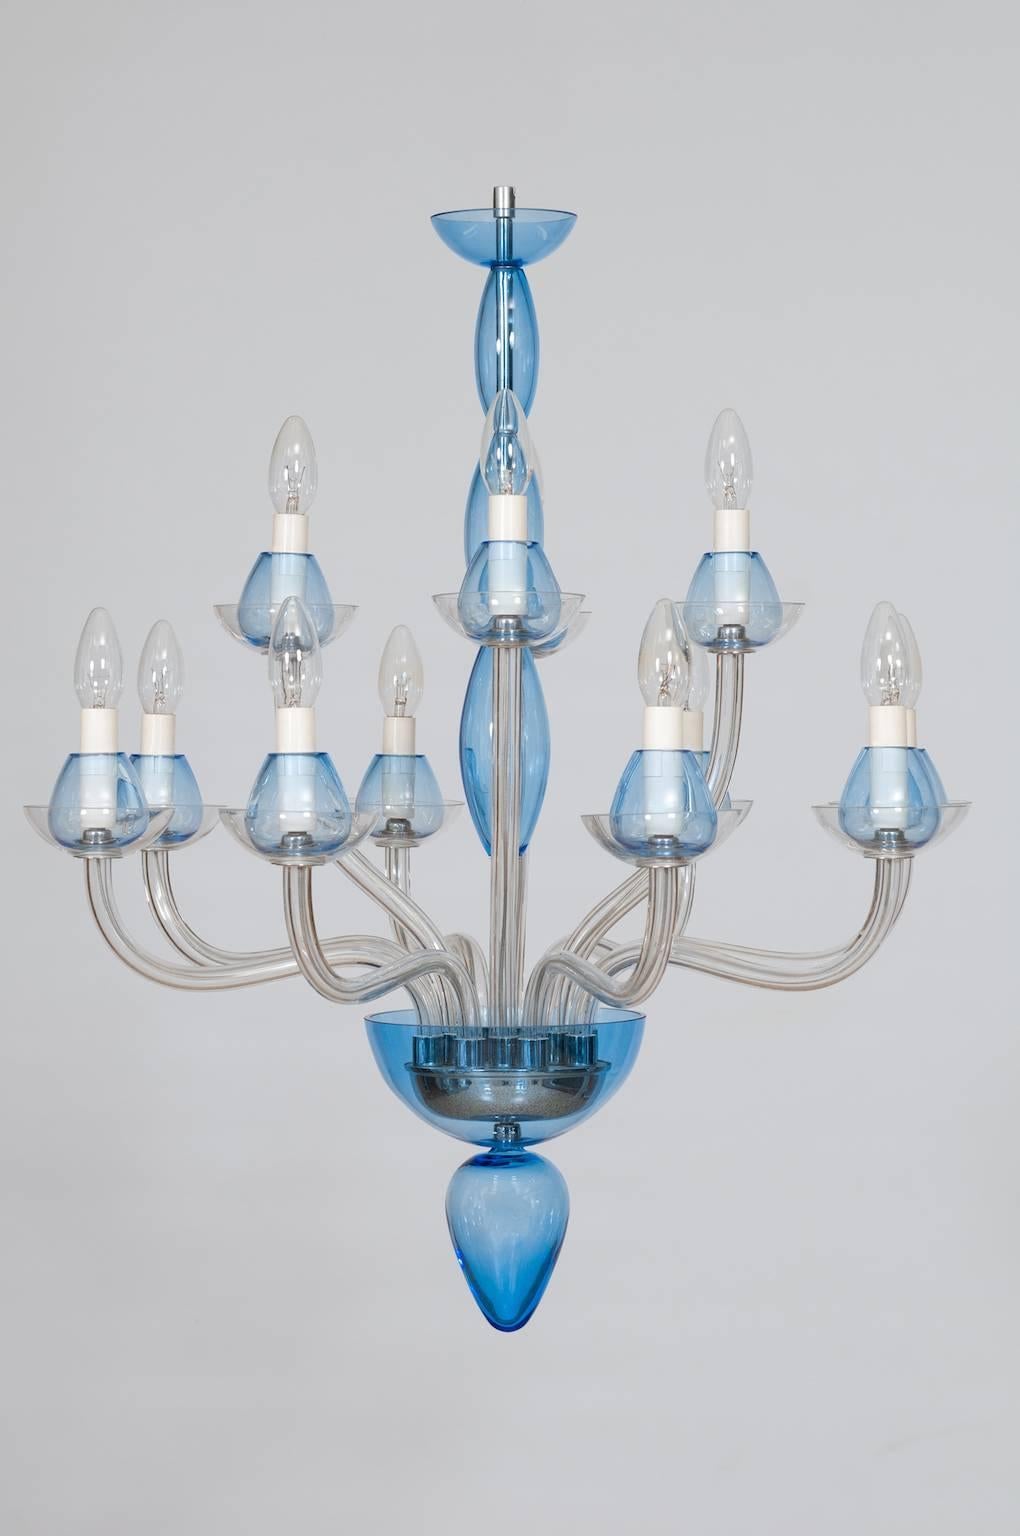 Elegant, and Modern Italian Venetian,Chandelier, blown Murano Glass, Transparent & Light-Blue, 1990s, composed by transparent twelve arms having each one a cup colored transparent and light-blue, and the main stem having the finishes in light-blue,